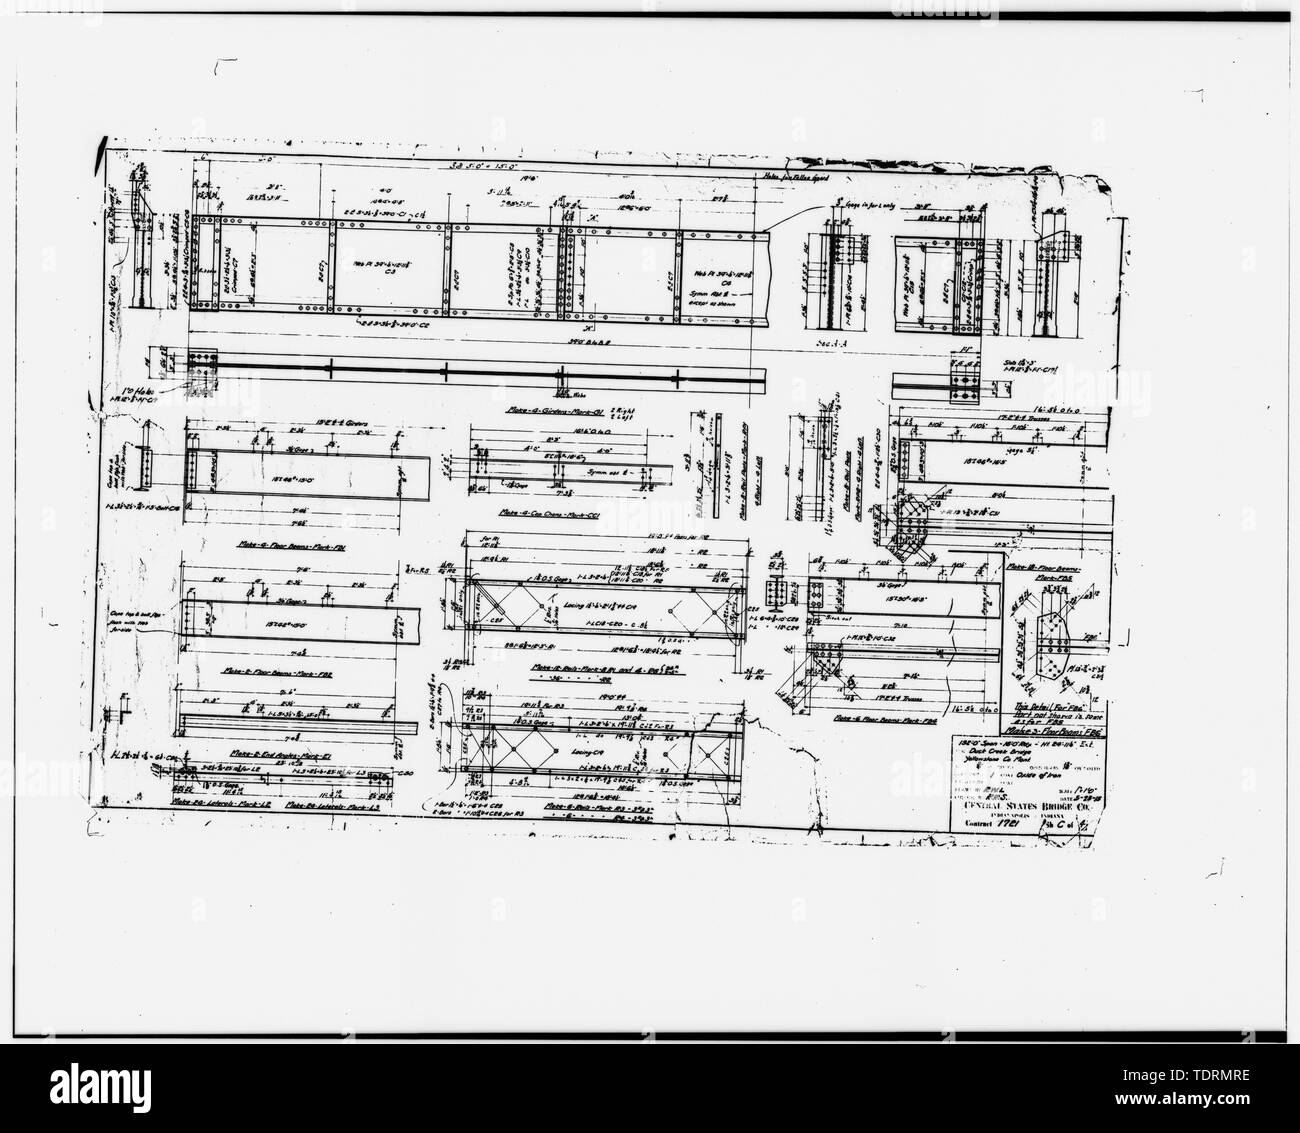 Photographic copy of microfilm of original shop drawing by the Central States Bridge Company, Indianapolis, Indiana, dated May 25, 1915, in the possession of the Yellowstone County Surveyor, Yellowstone County Courthouse, Billings, Montana. FLOOR SYSTEM - Duck Creek Bridge, Spanning Yellowstone River on Route 329, Southwest of Billings, Billings, Yellowstone County, MT Stock Photo